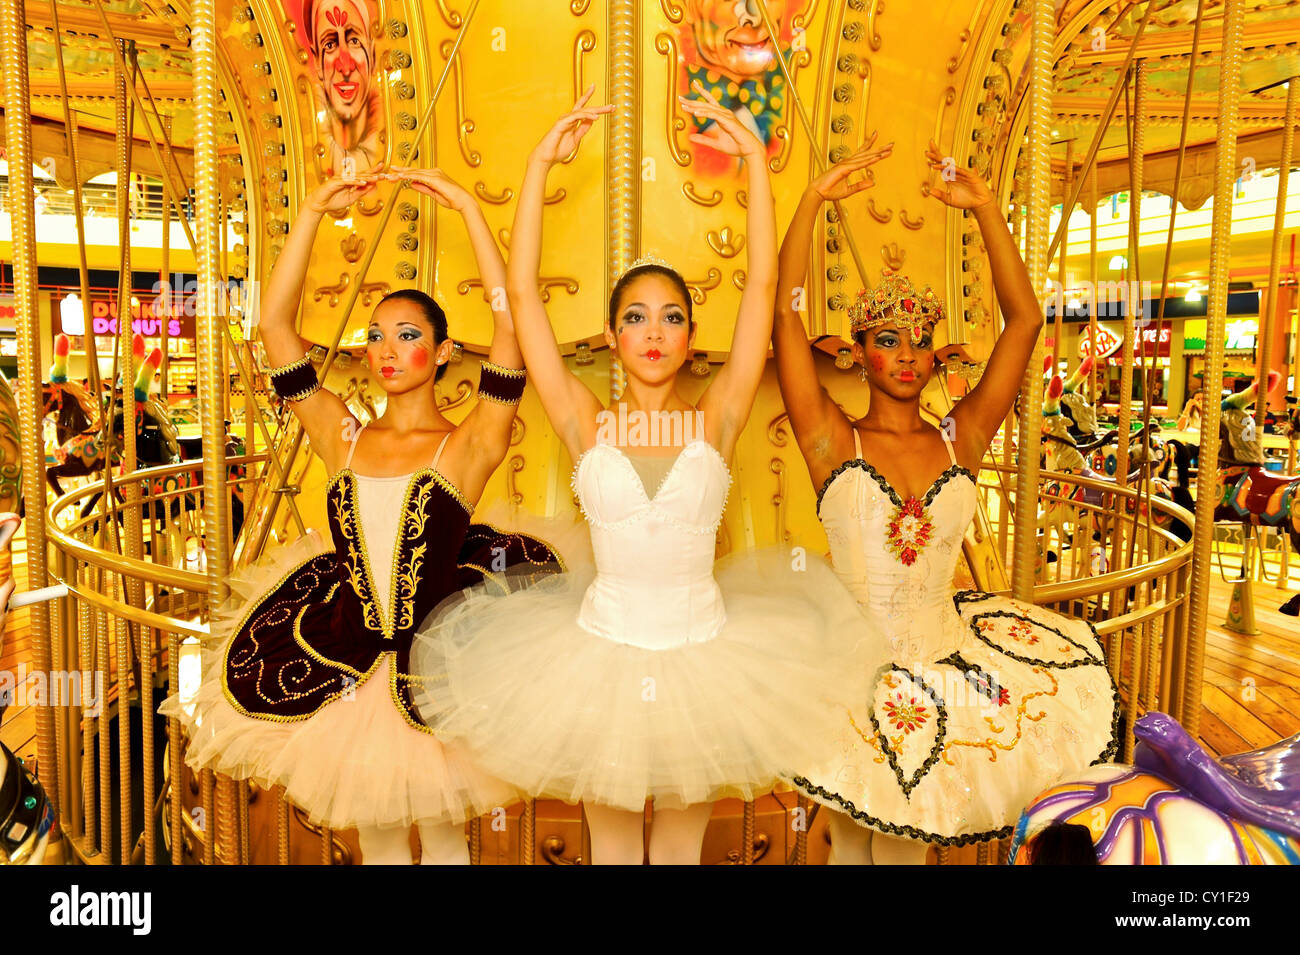 National Ballet of Panama dancers pose as dolls at a merry go round. Stock Photo